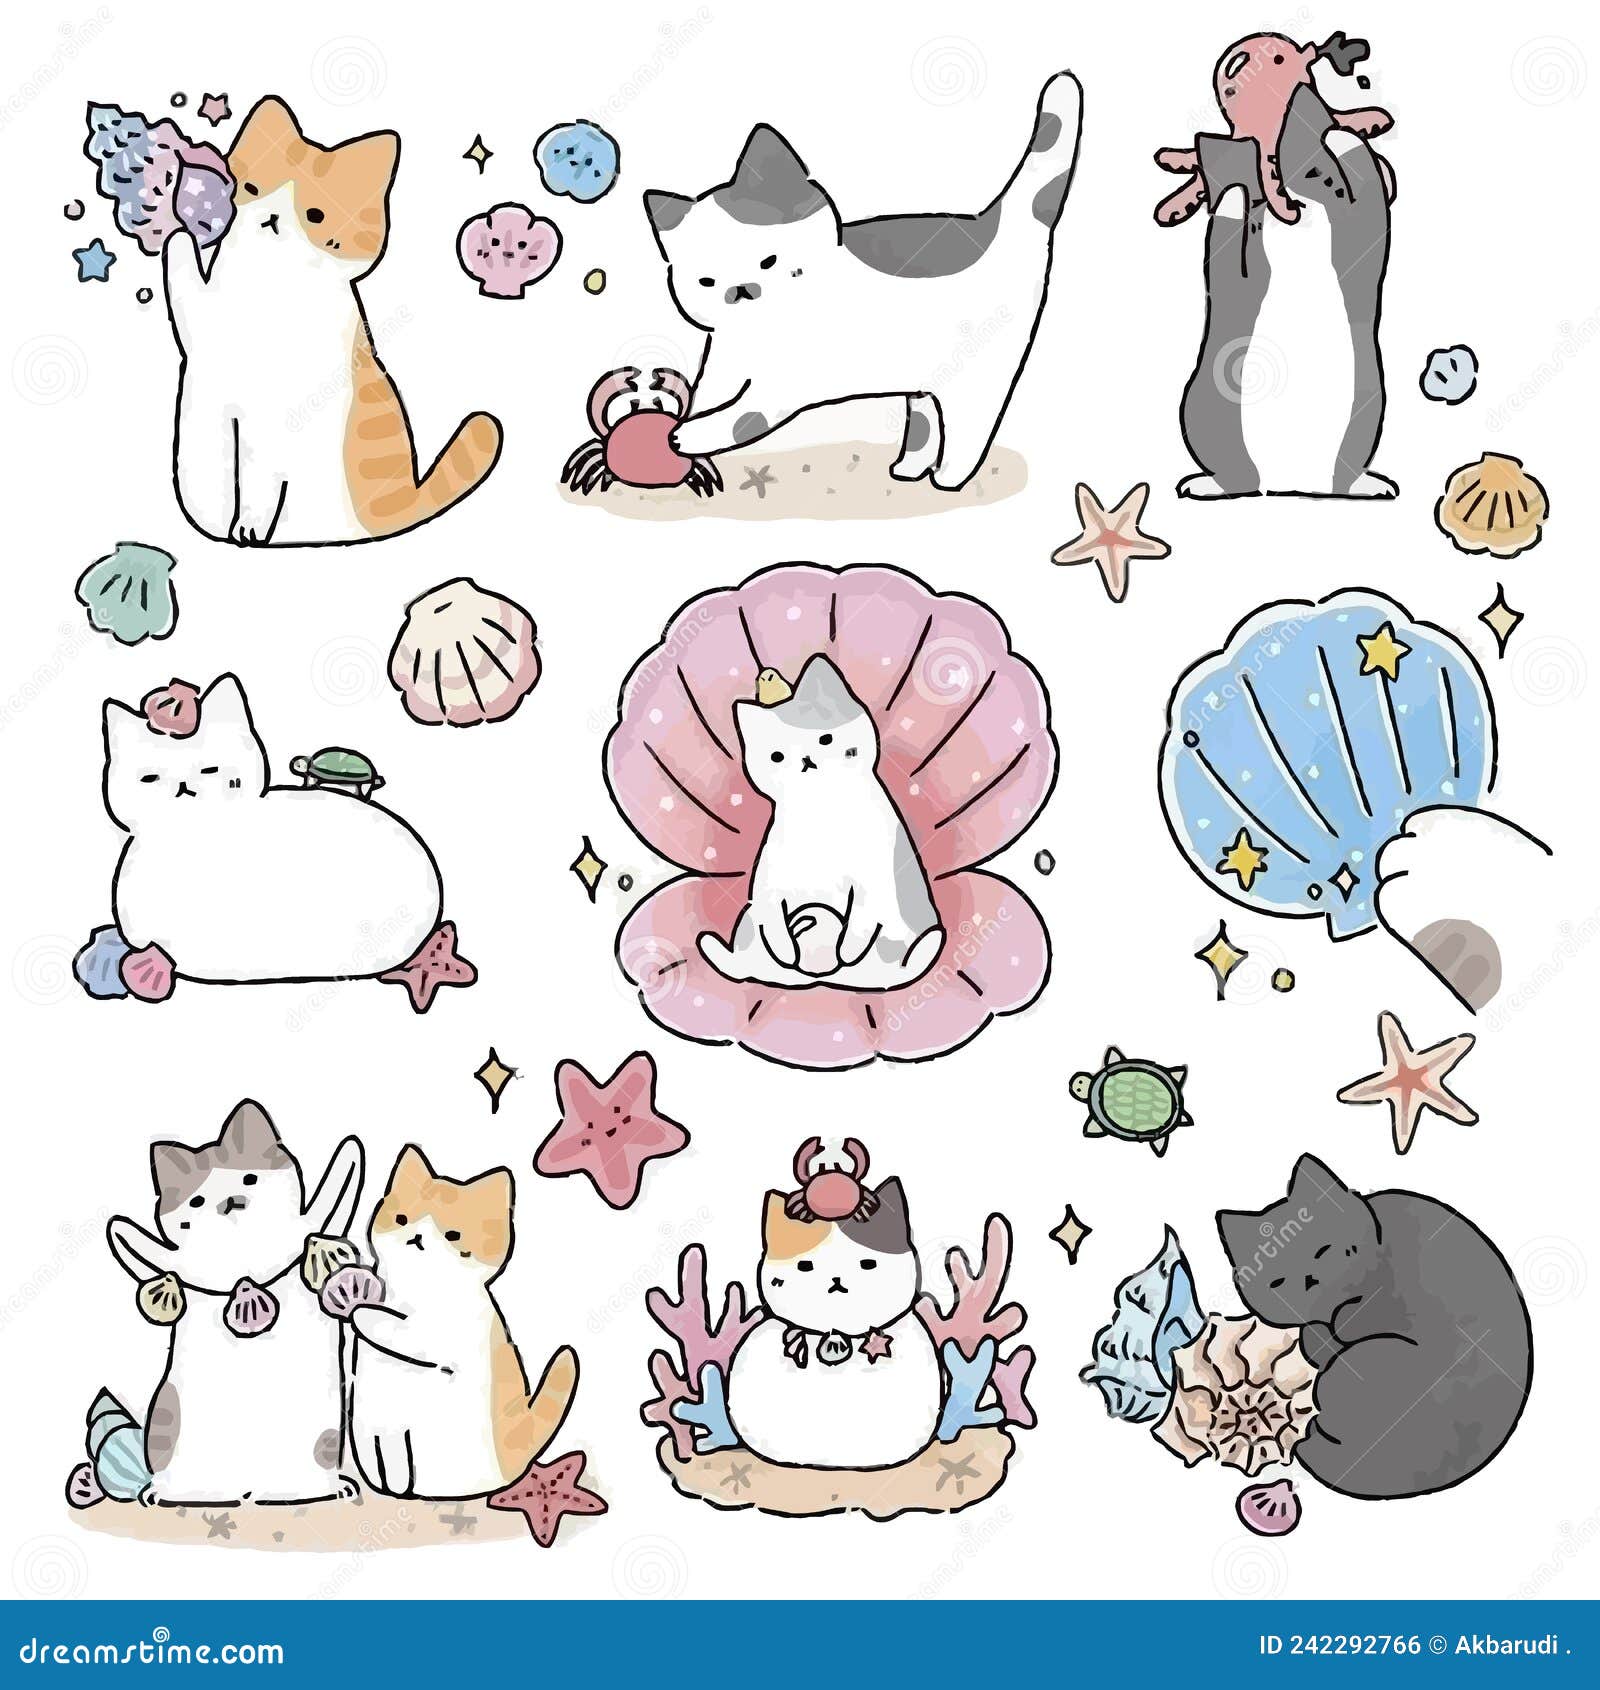 Vector Set Of Flat Cat Icons And Illustrations - Funny Cartoon